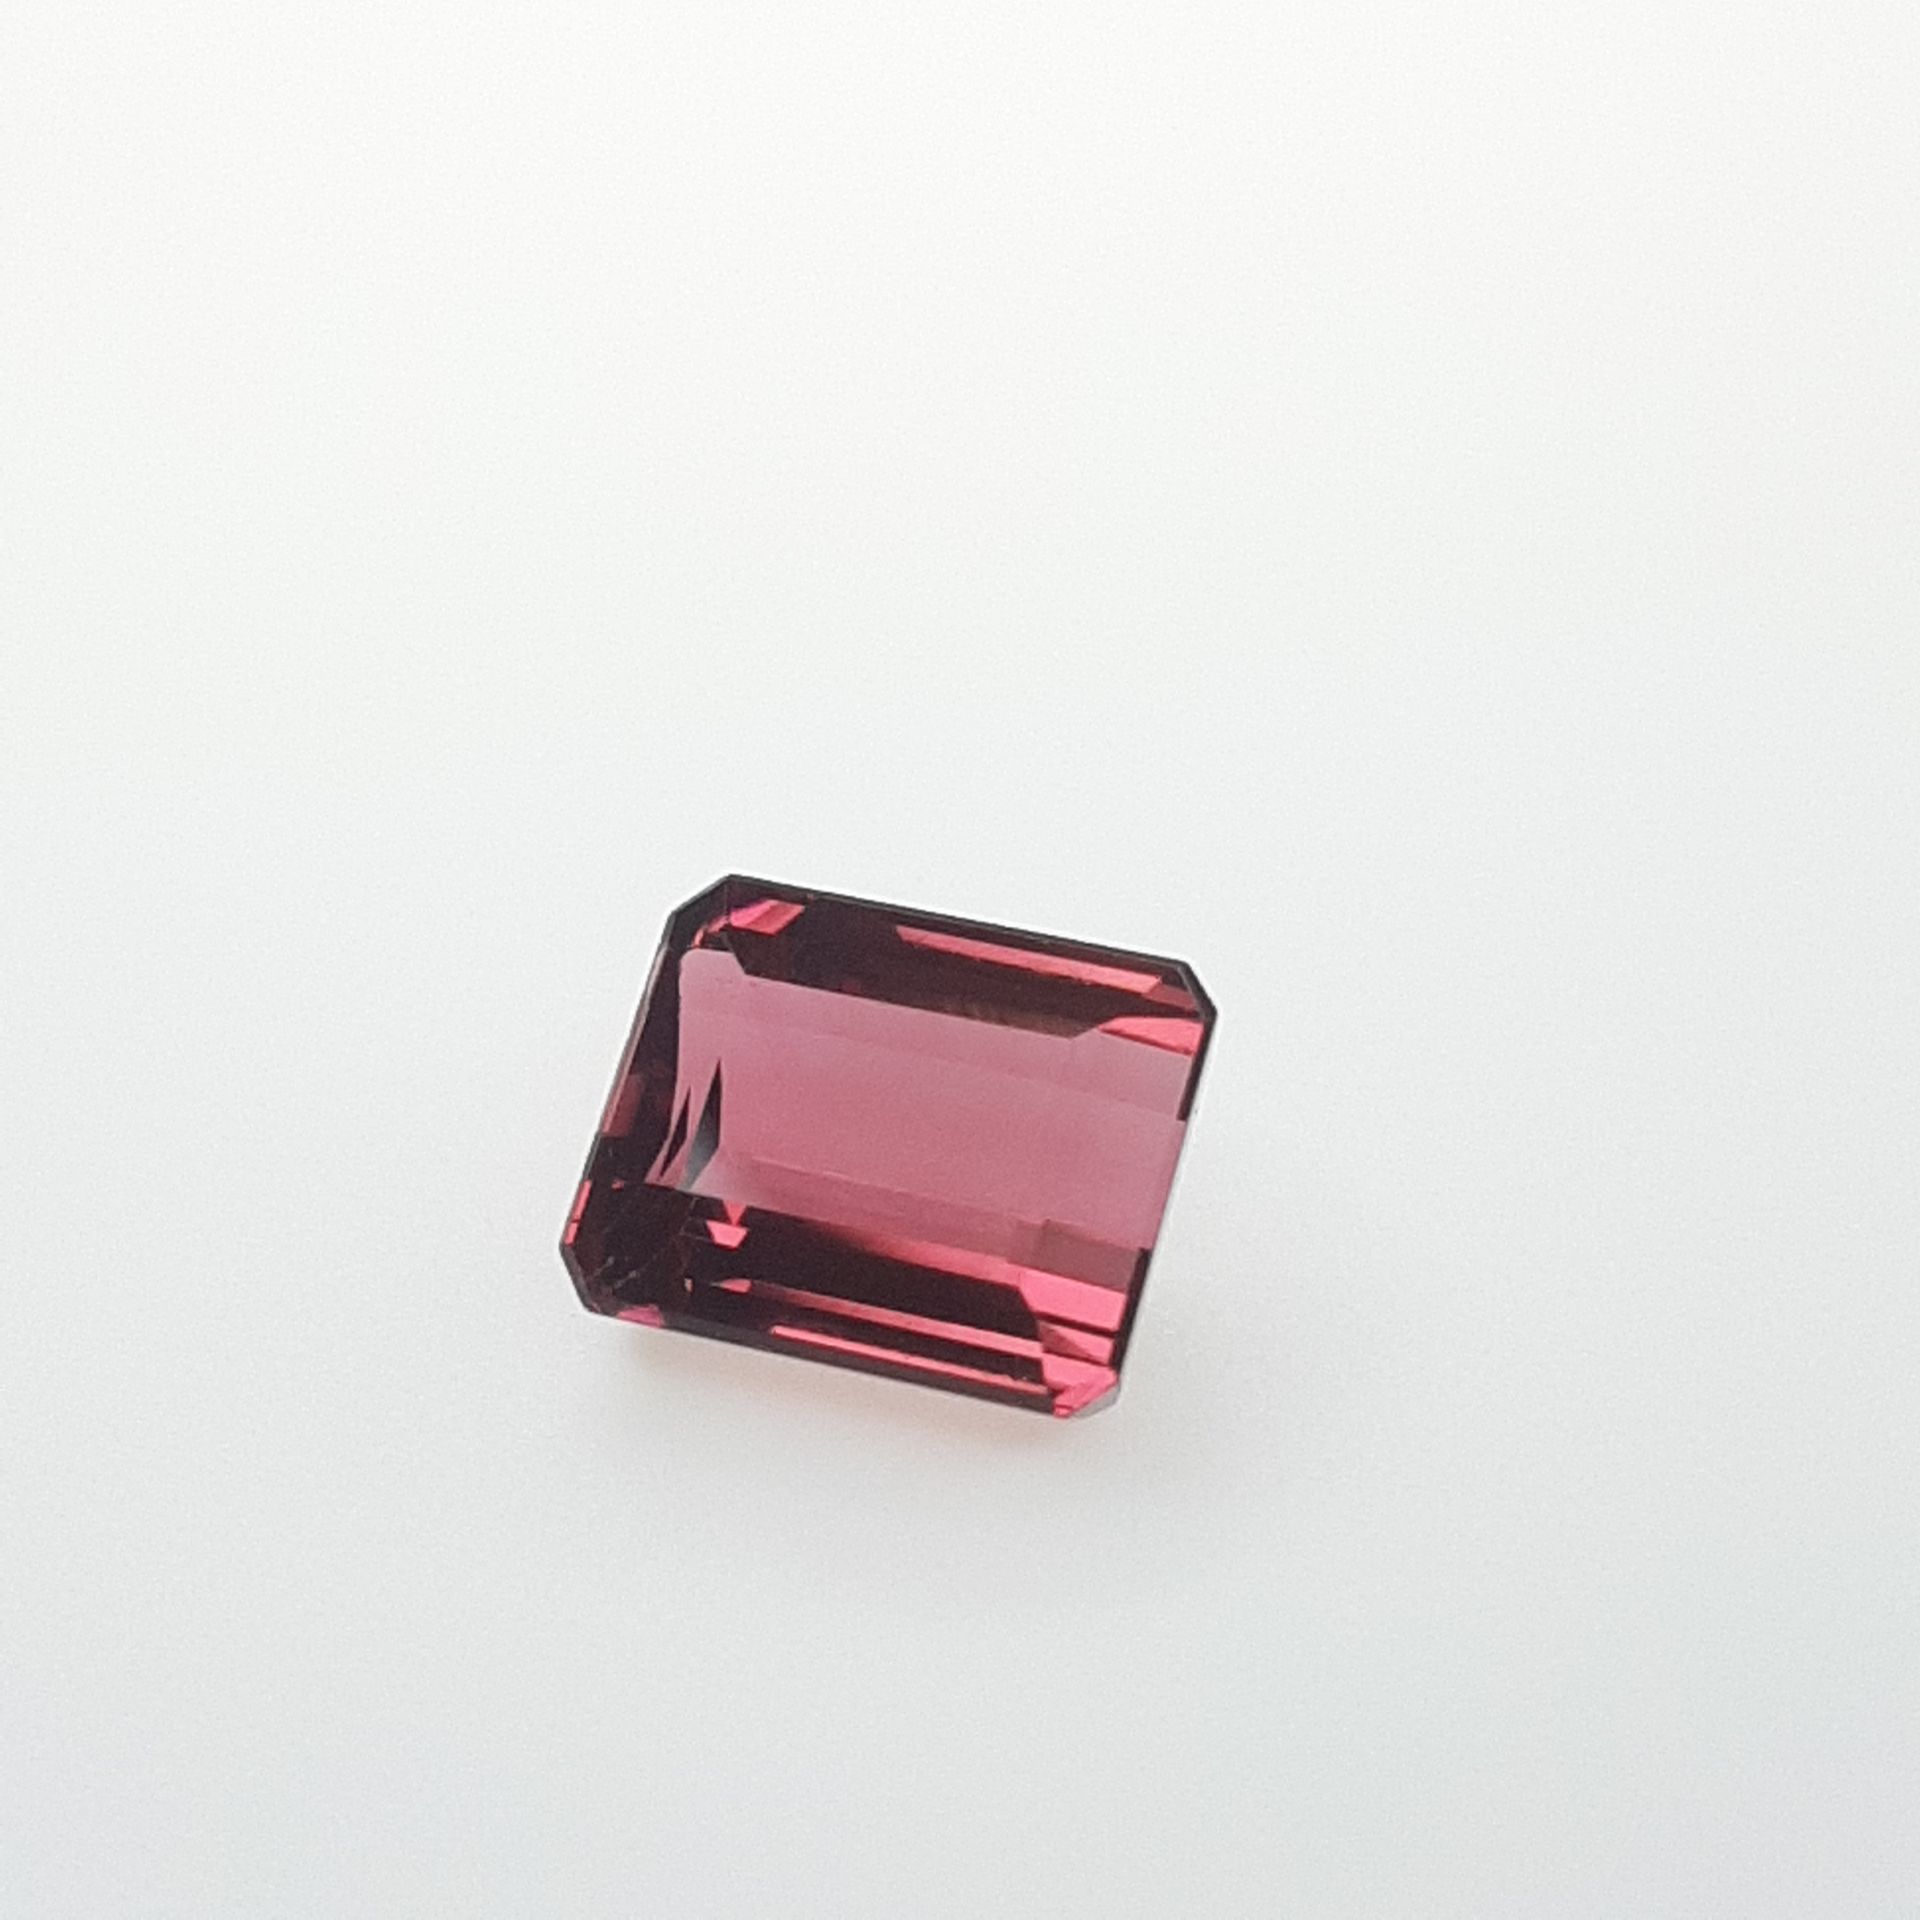 Rubellite - BRESIL - 5.90 cts RUBELLITE - From Brazil - Reddish pink color - Rec&hellip;